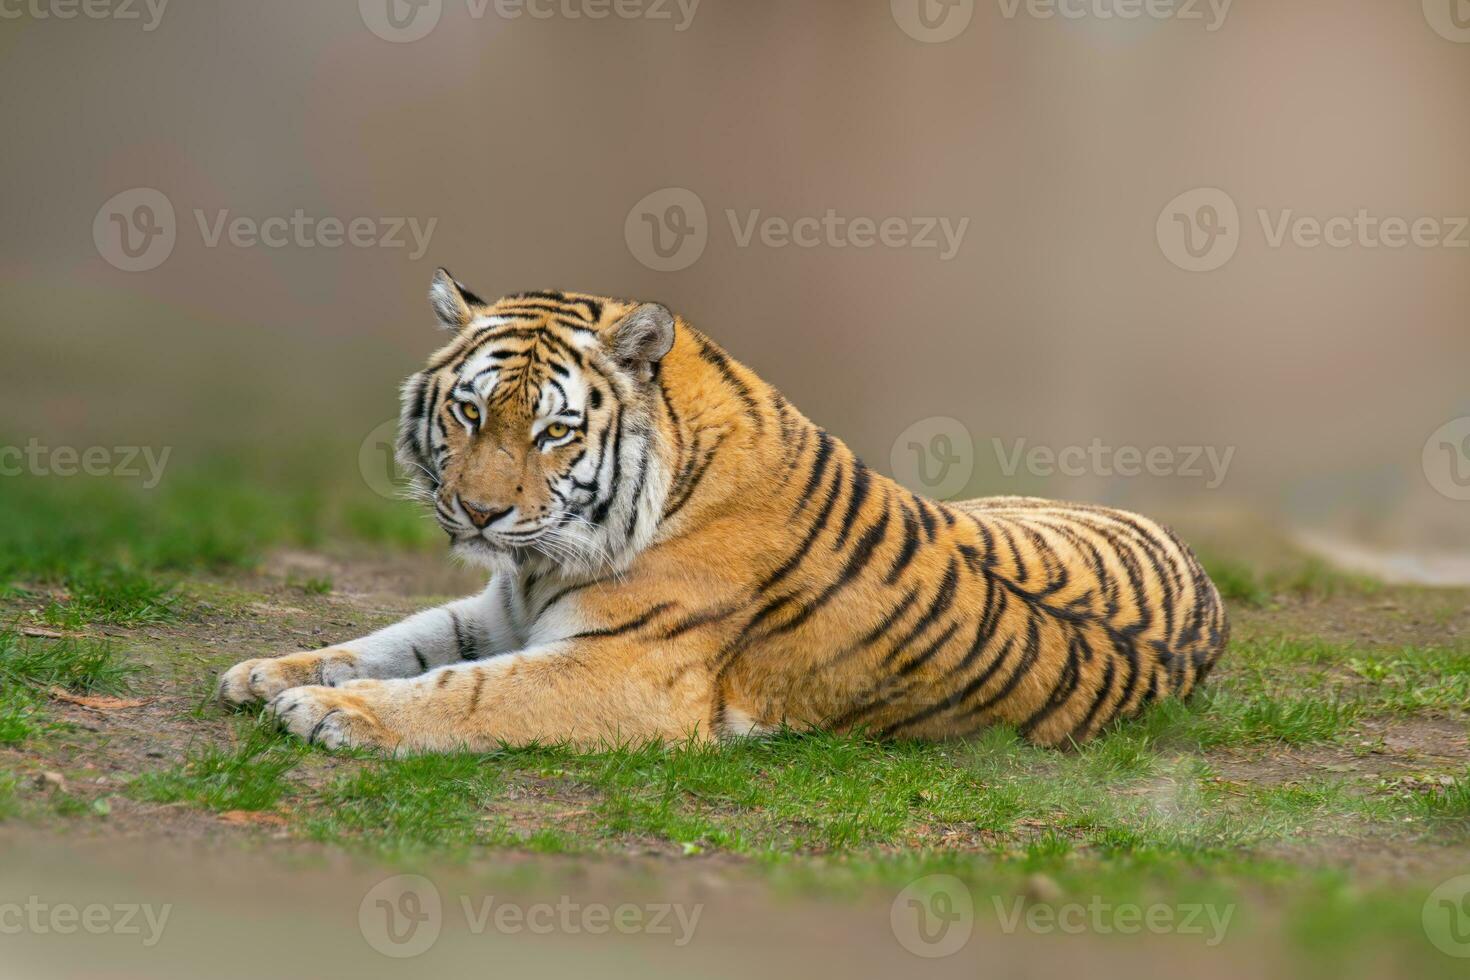 one large striped tiger Panthera tigris lies relaxed and enjoys the sun photo